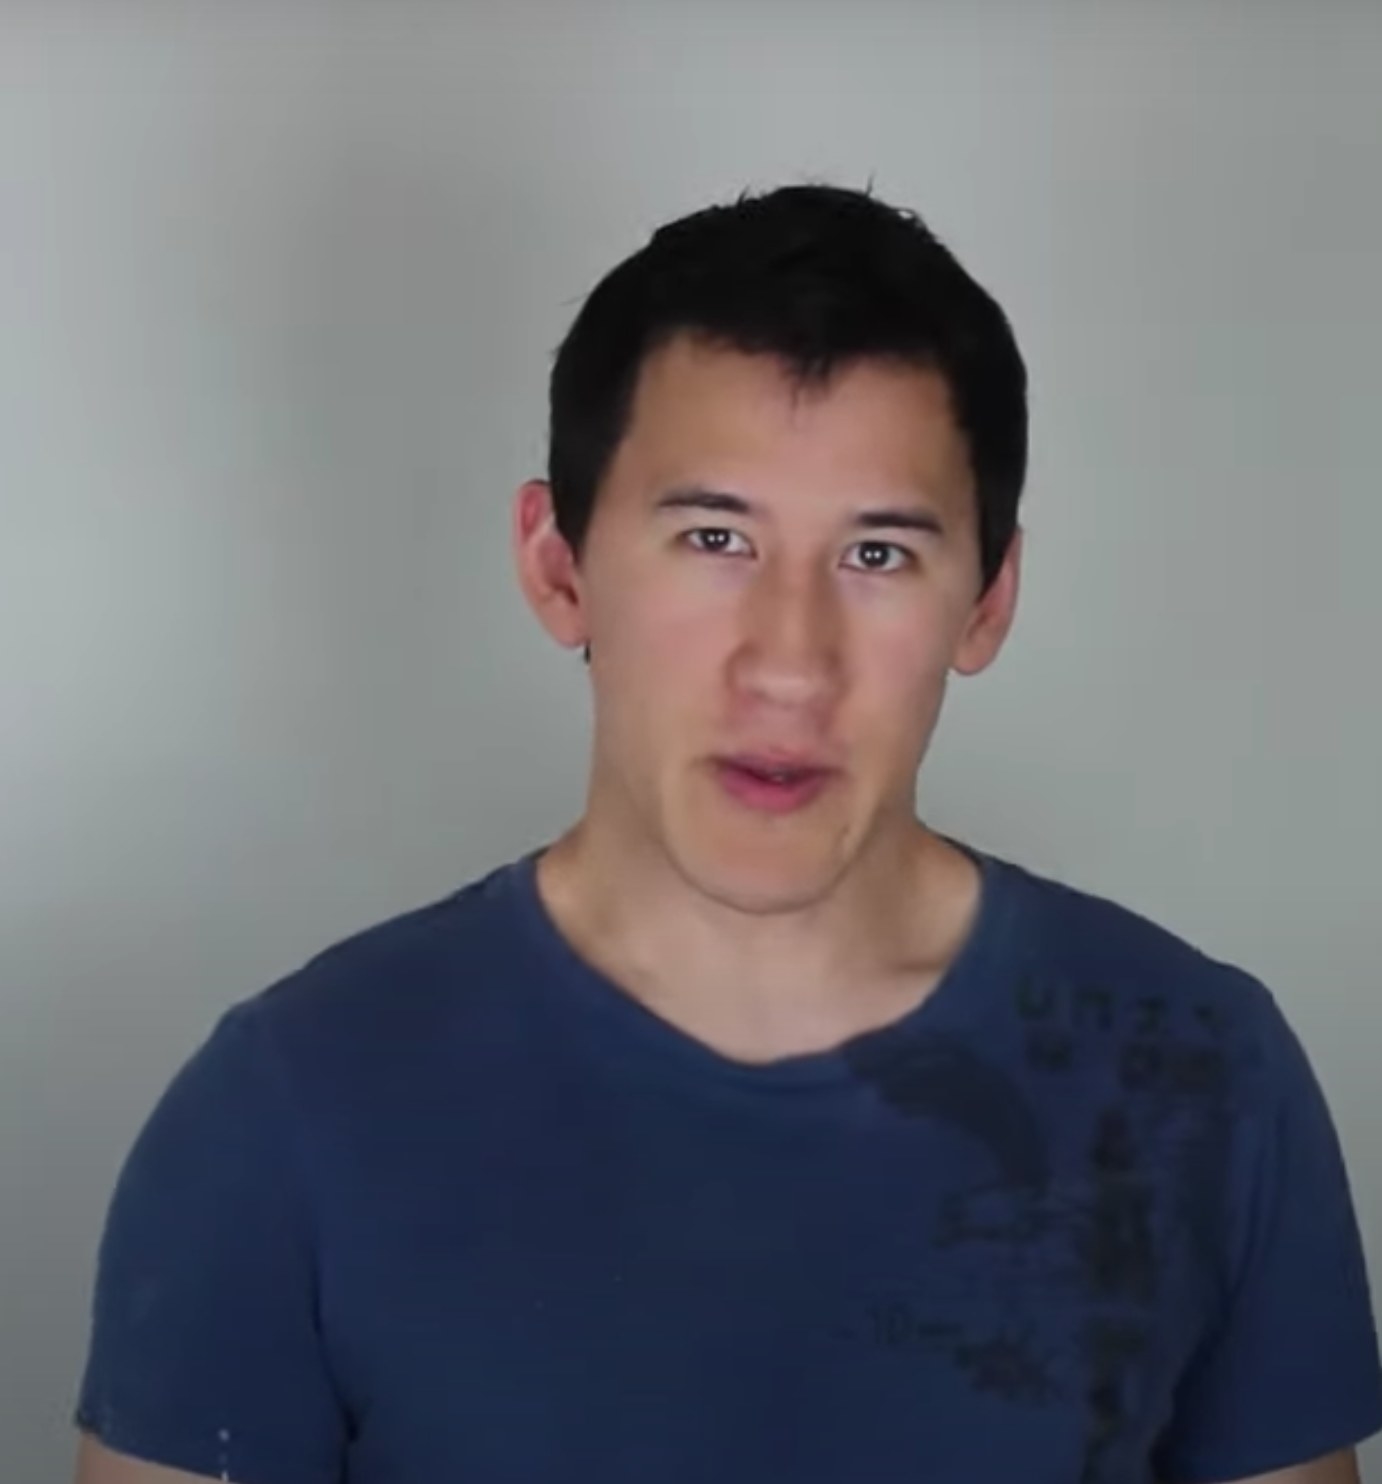 Mark Fischbach in a YouTube video from July of 2012 called &quot;MILESTONES SUCCESS AND DEAD SPACE&quot;